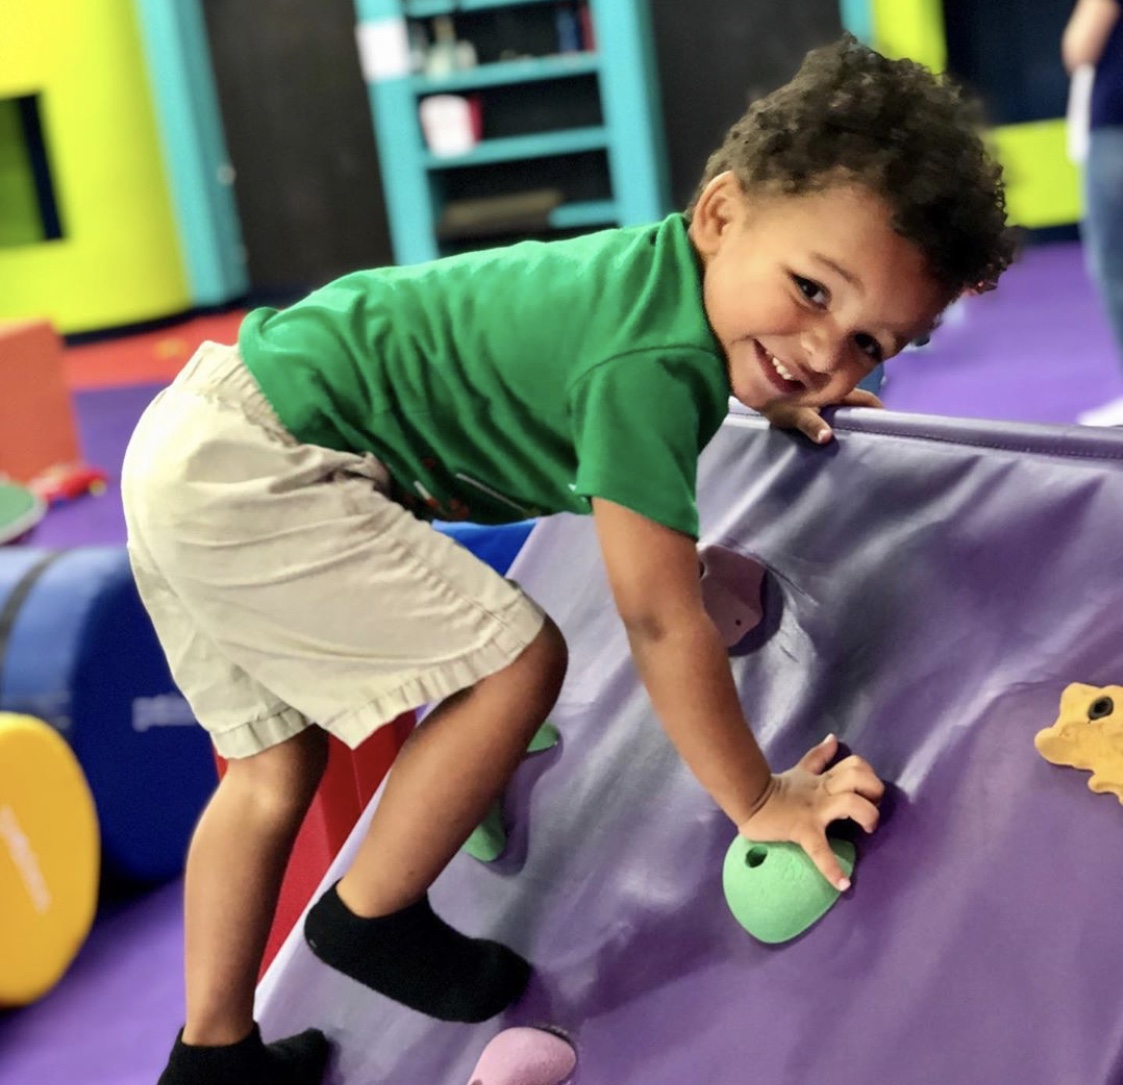 Come play, learn, and explore with us at Romp n' Roll Midlothian!